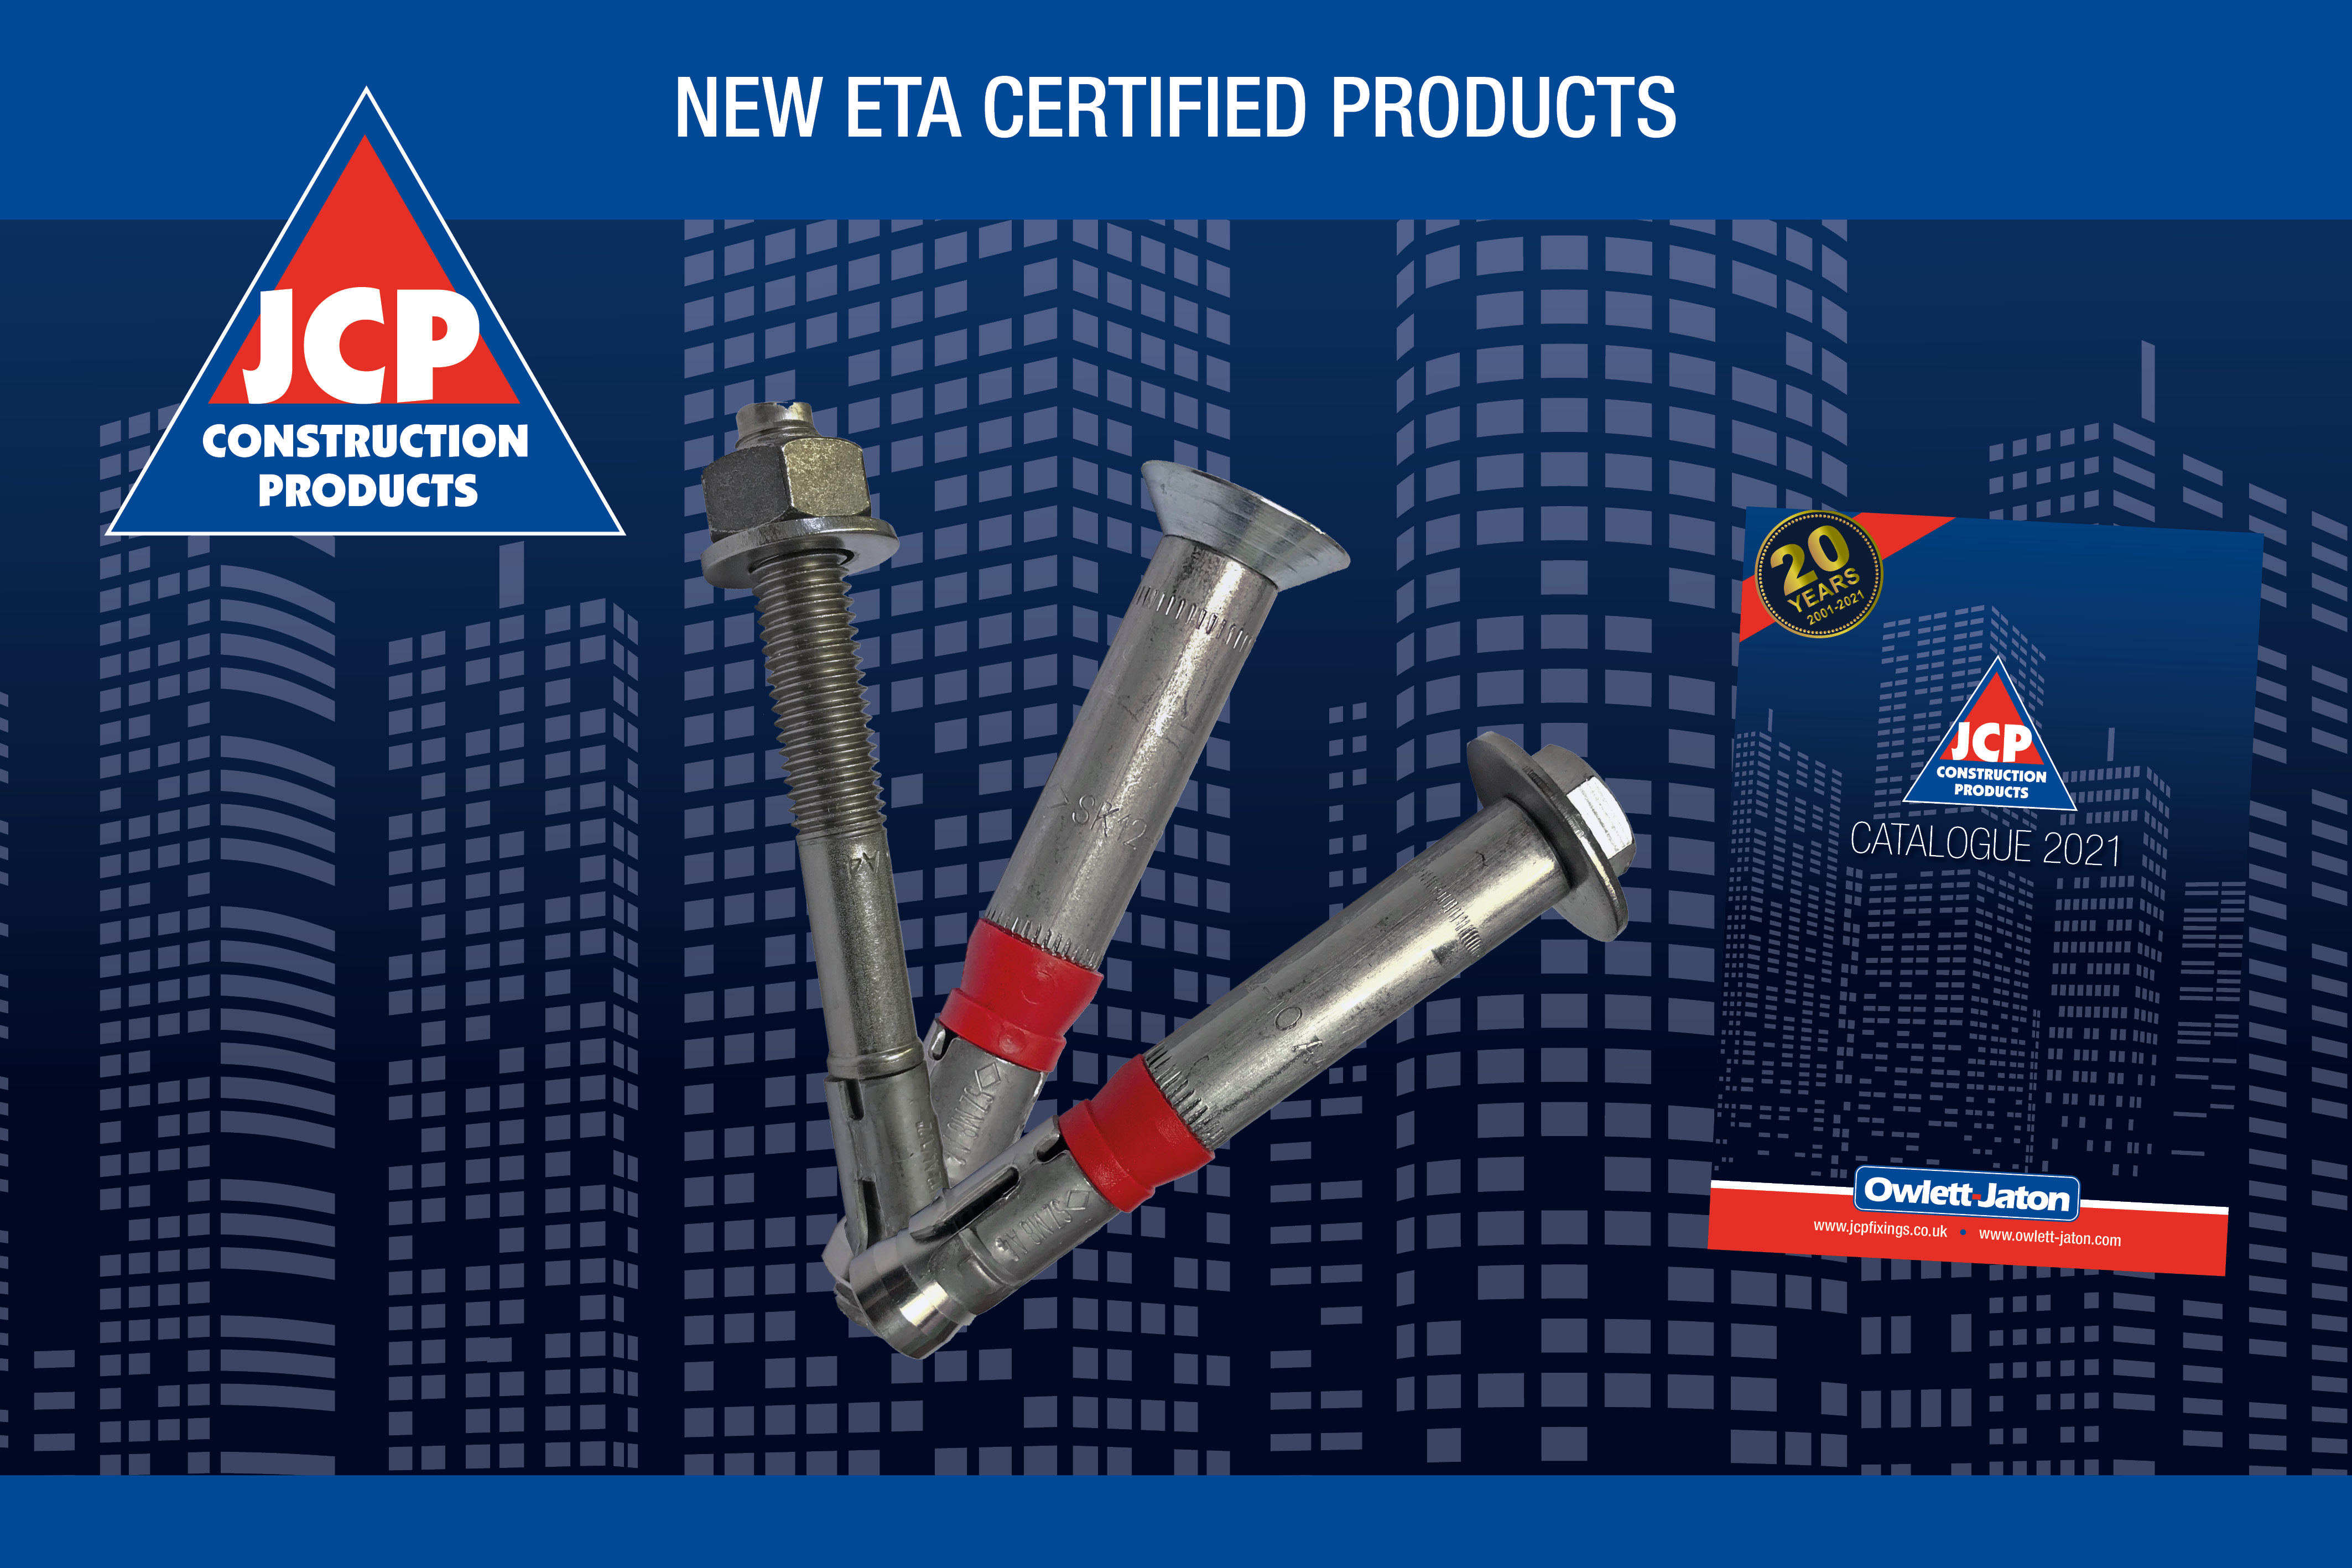 JCP Fixings Expand Their Certified Offering